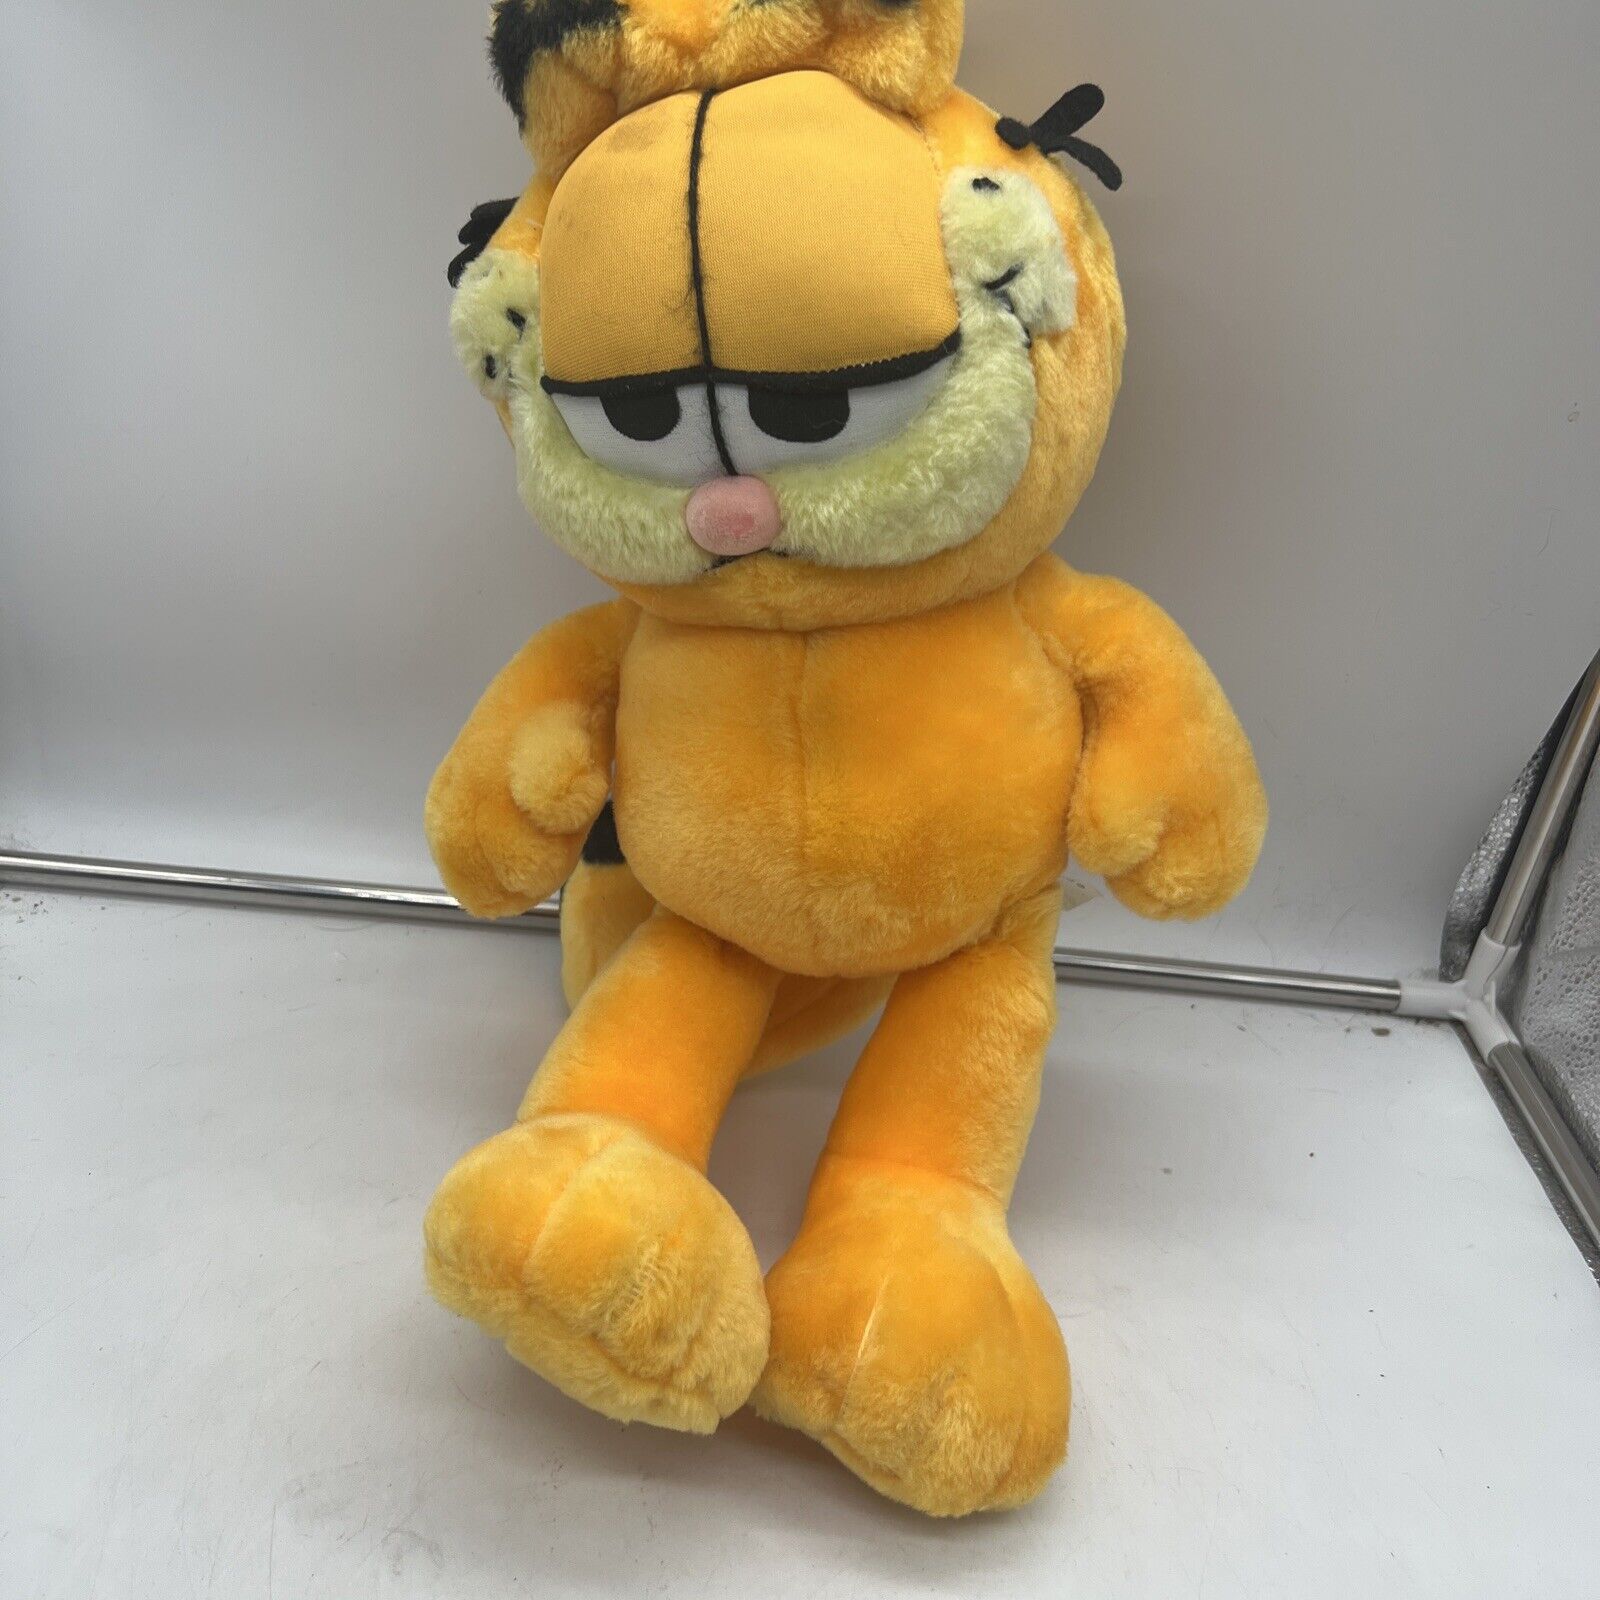 Vintage Garfield 12” Plush Stuffed Animal Paws Play By Play Cat Collectible